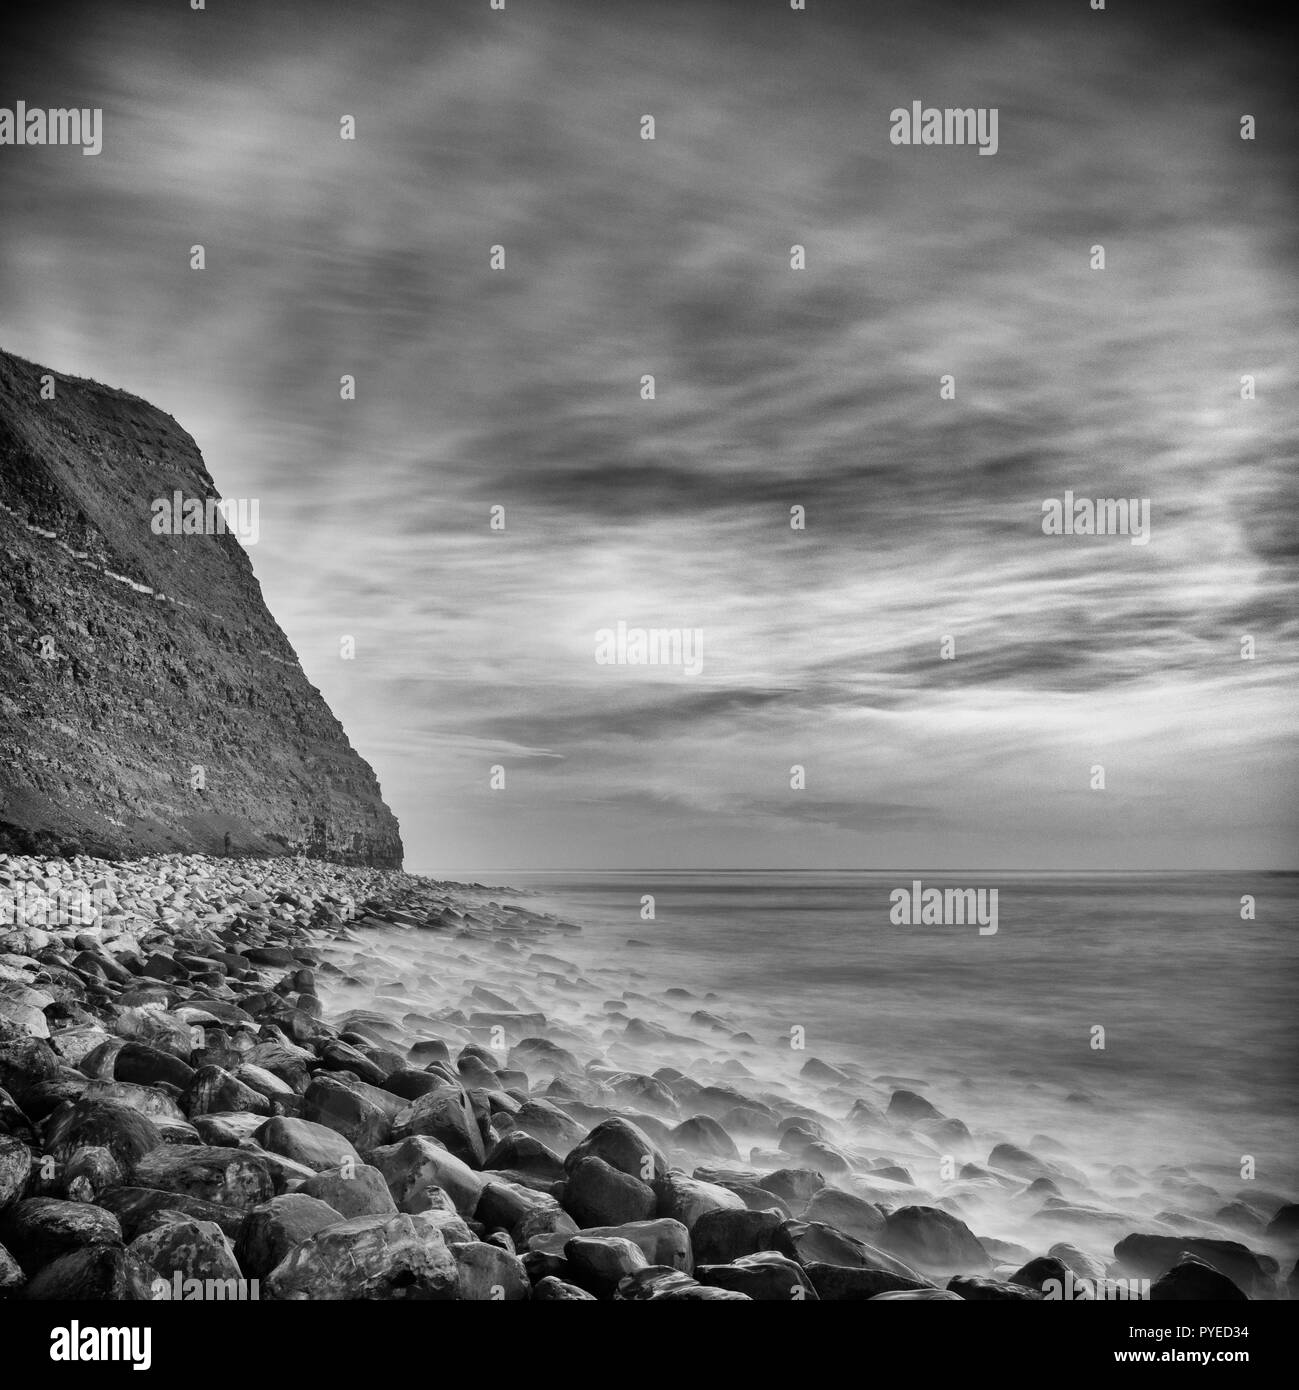 A black & white view of the cliffs and rocks on the coastline at Kimmeridge, Dorset Stock Photo